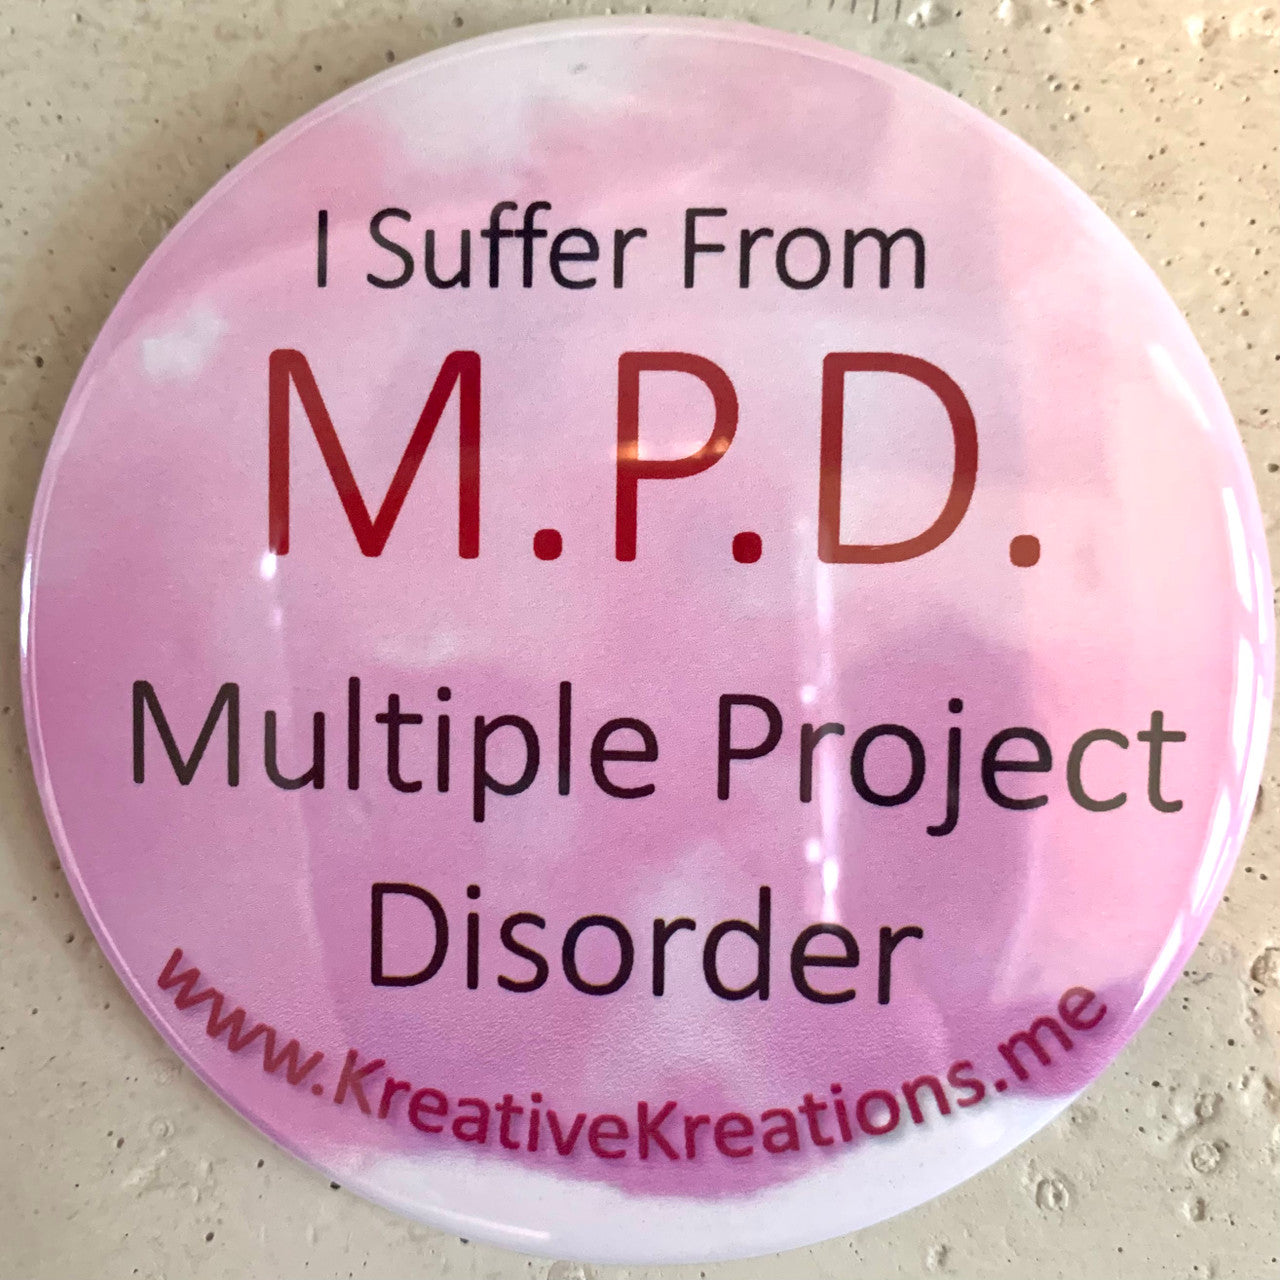 “I Suffer From M.P.D.” Pin-Back Button